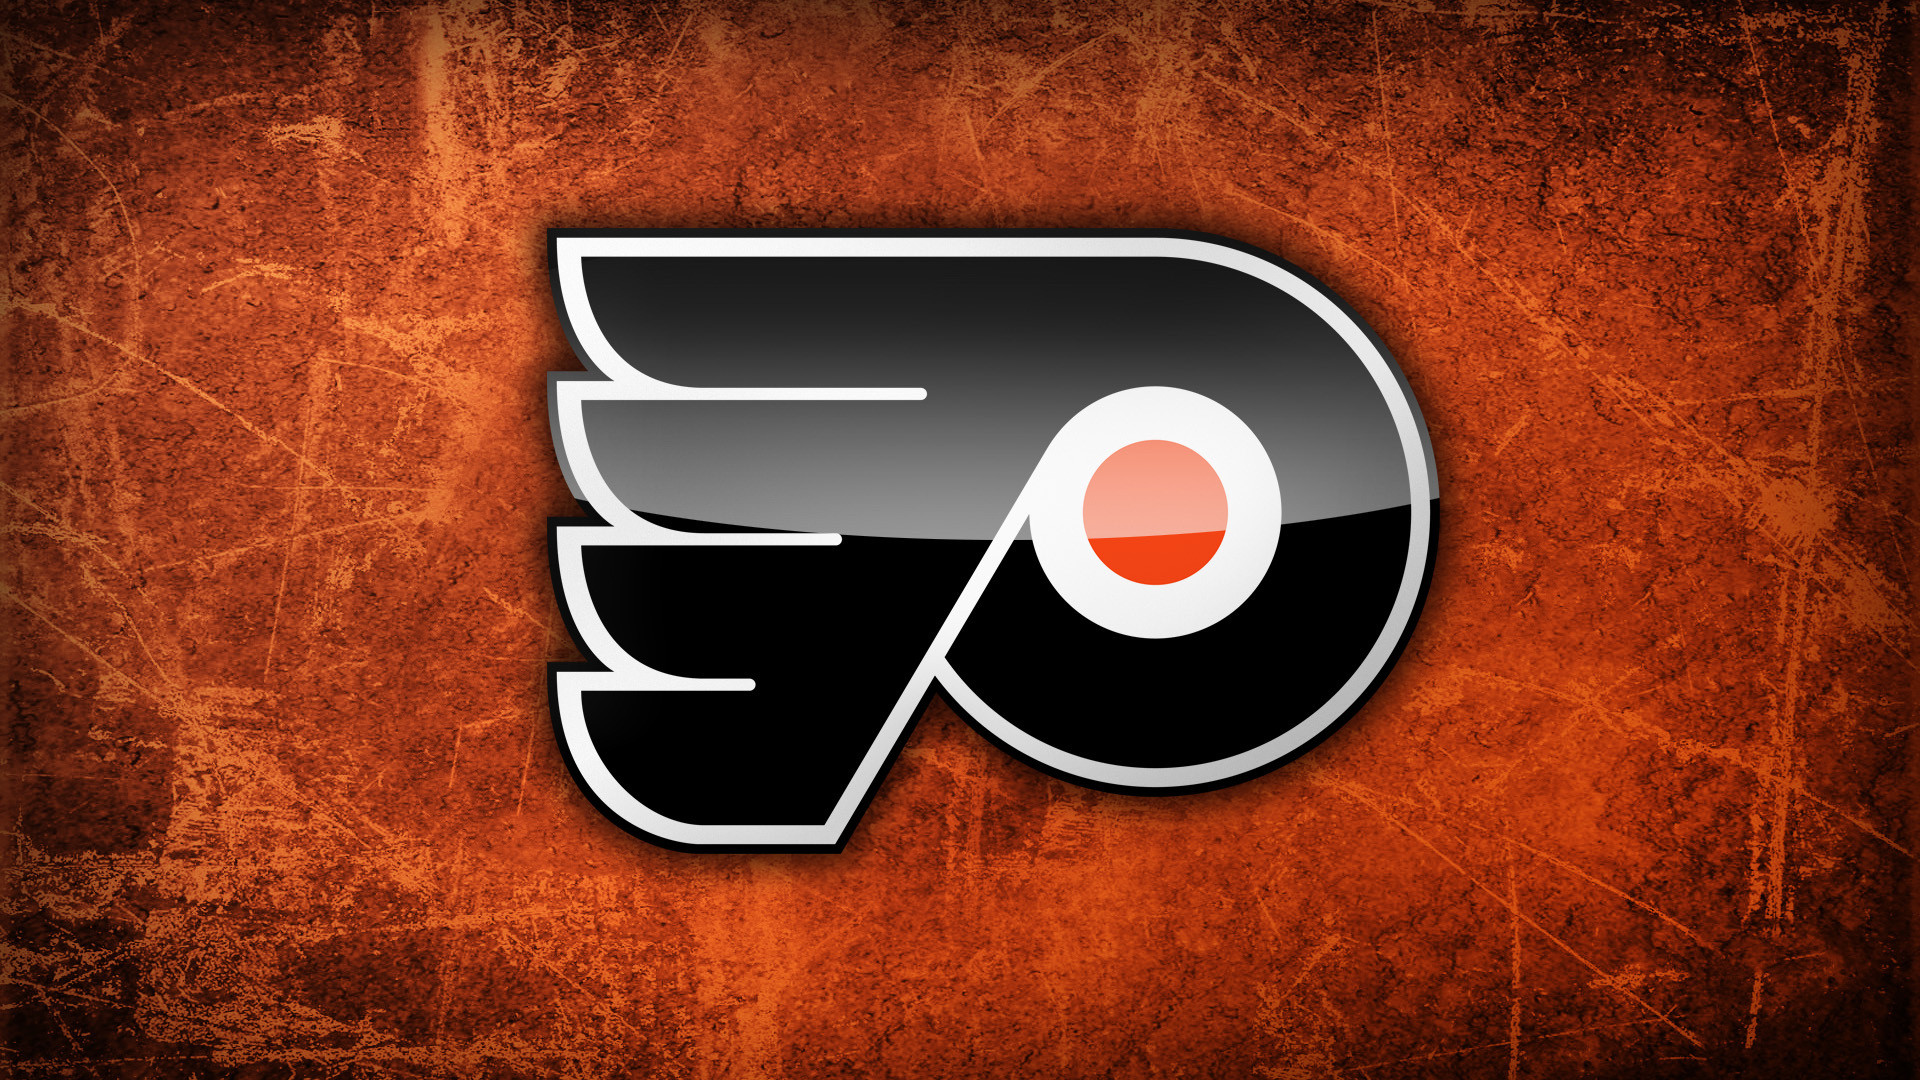 1920x1080 flyers iphone wallpaper Image Gallery Nhl Flyers